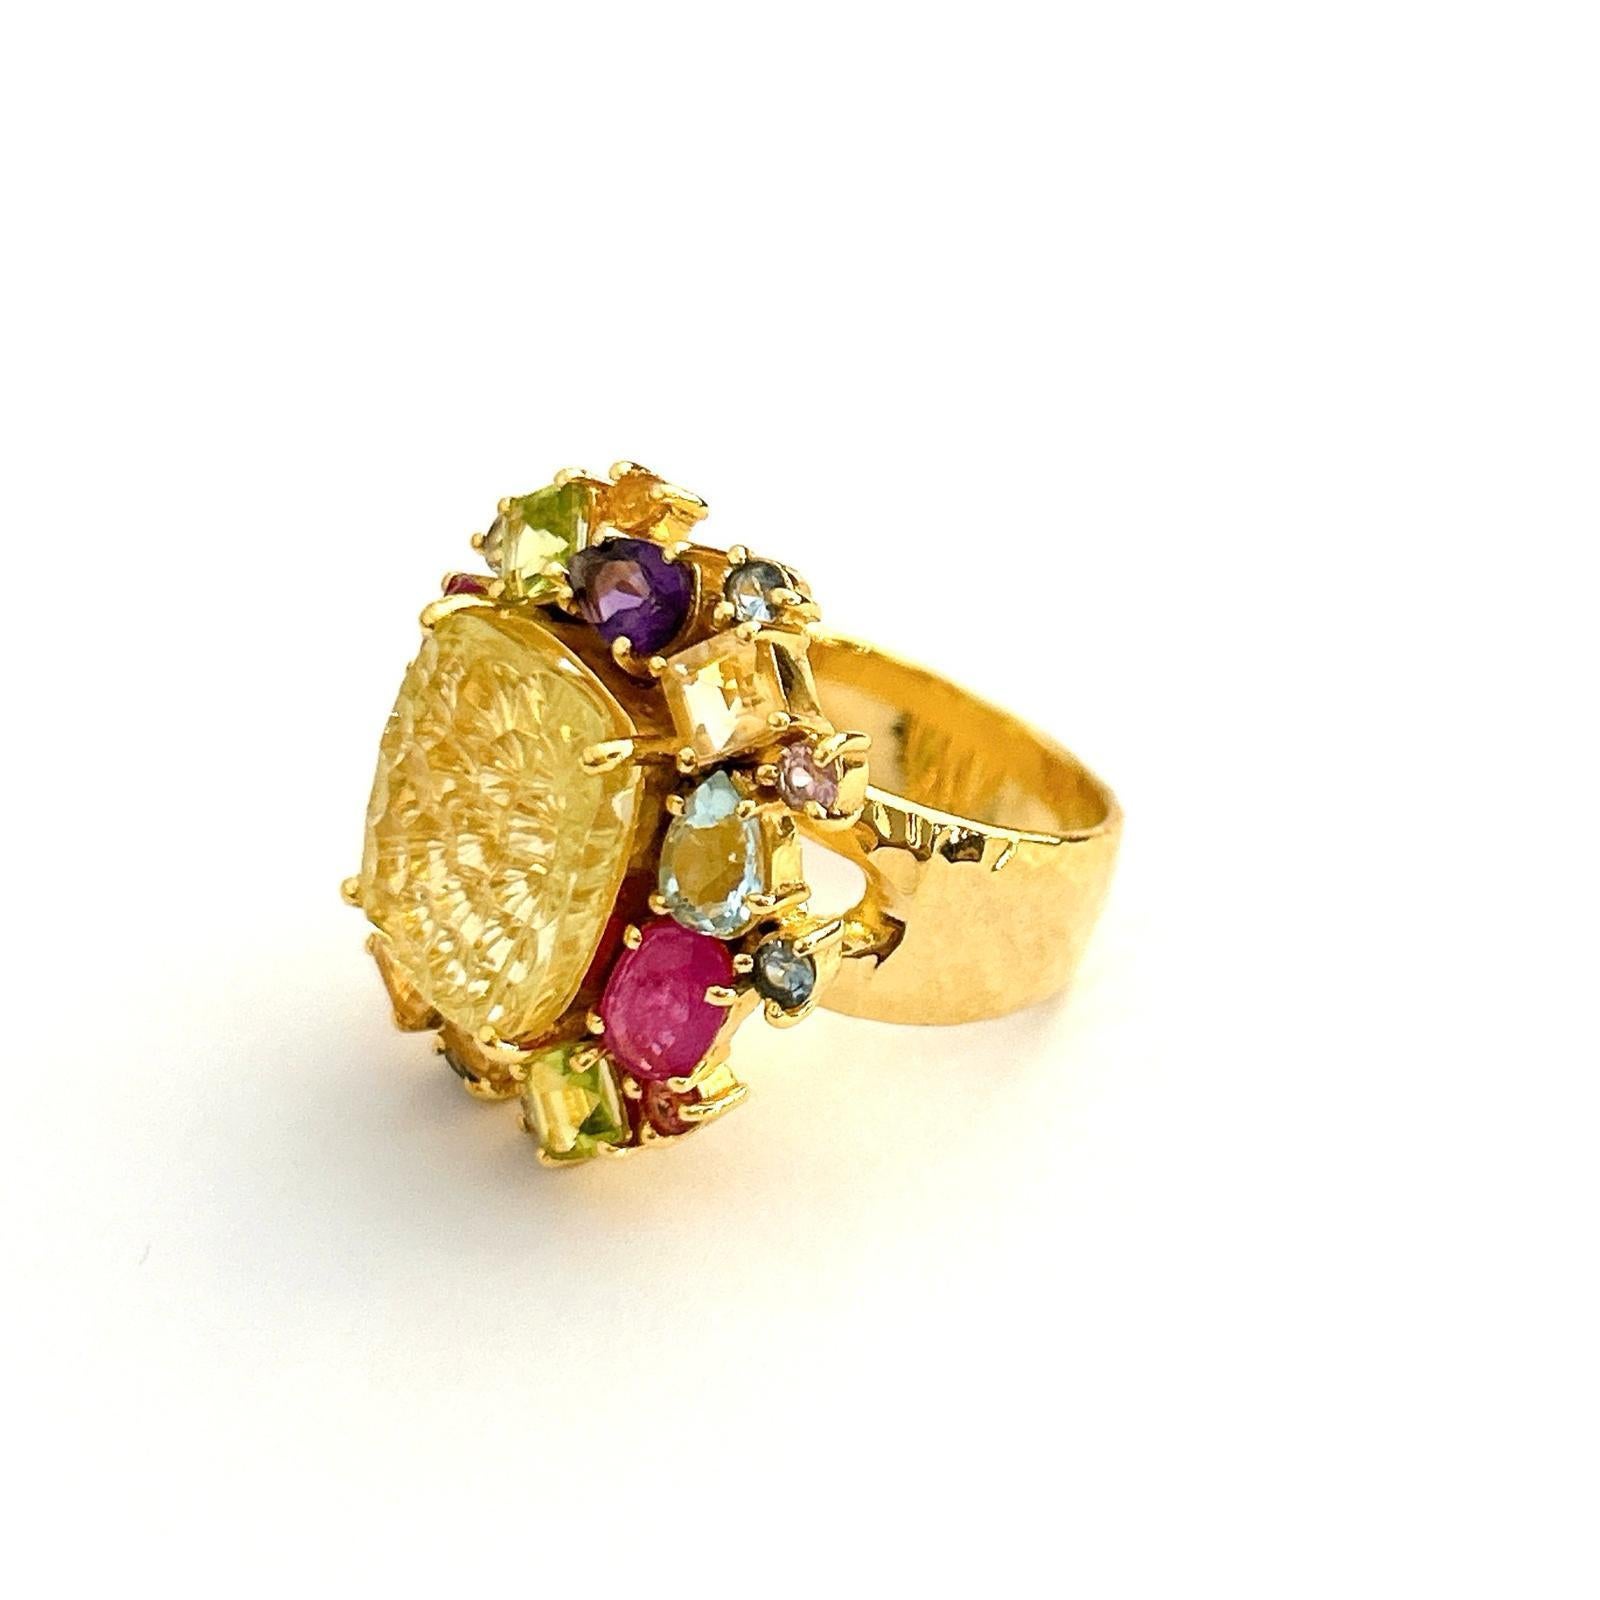 Bochic candy cocktail multi gem ring set in 18k gold & silver

Center square cut Citrine 
5 carat 
Multi gem, ruby, topaz, amethyst 
4 carats

This Ring is from the 